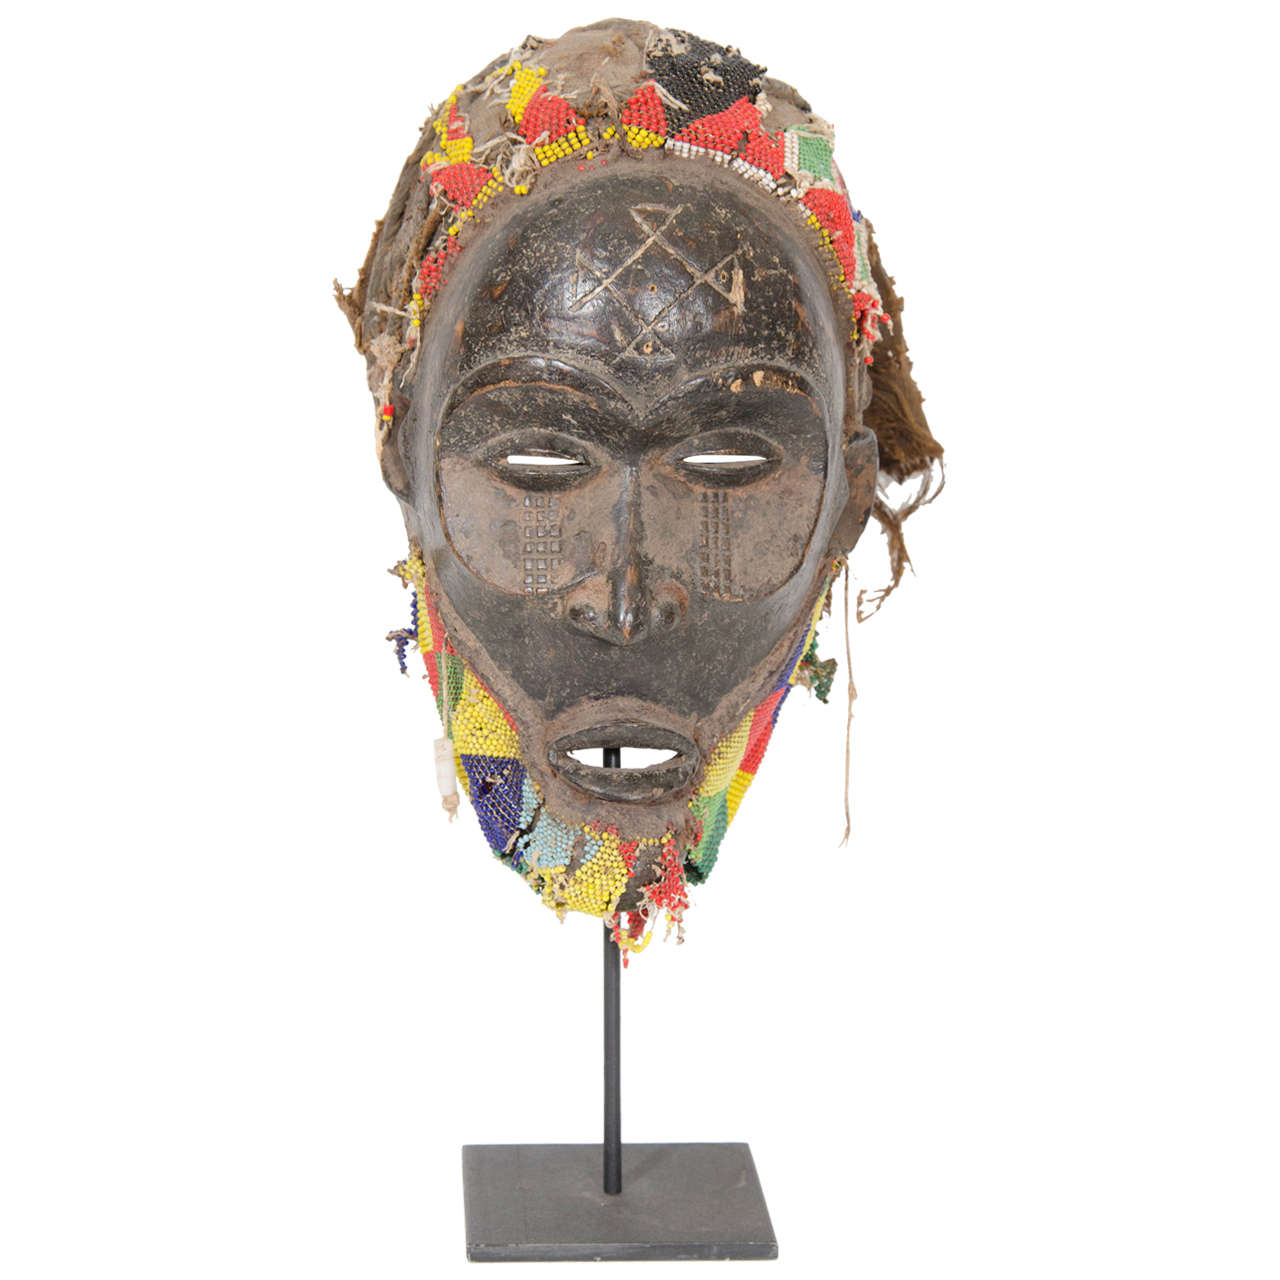 Beaded Wooden Mask in the Style of Chokwe Tribal Ritual